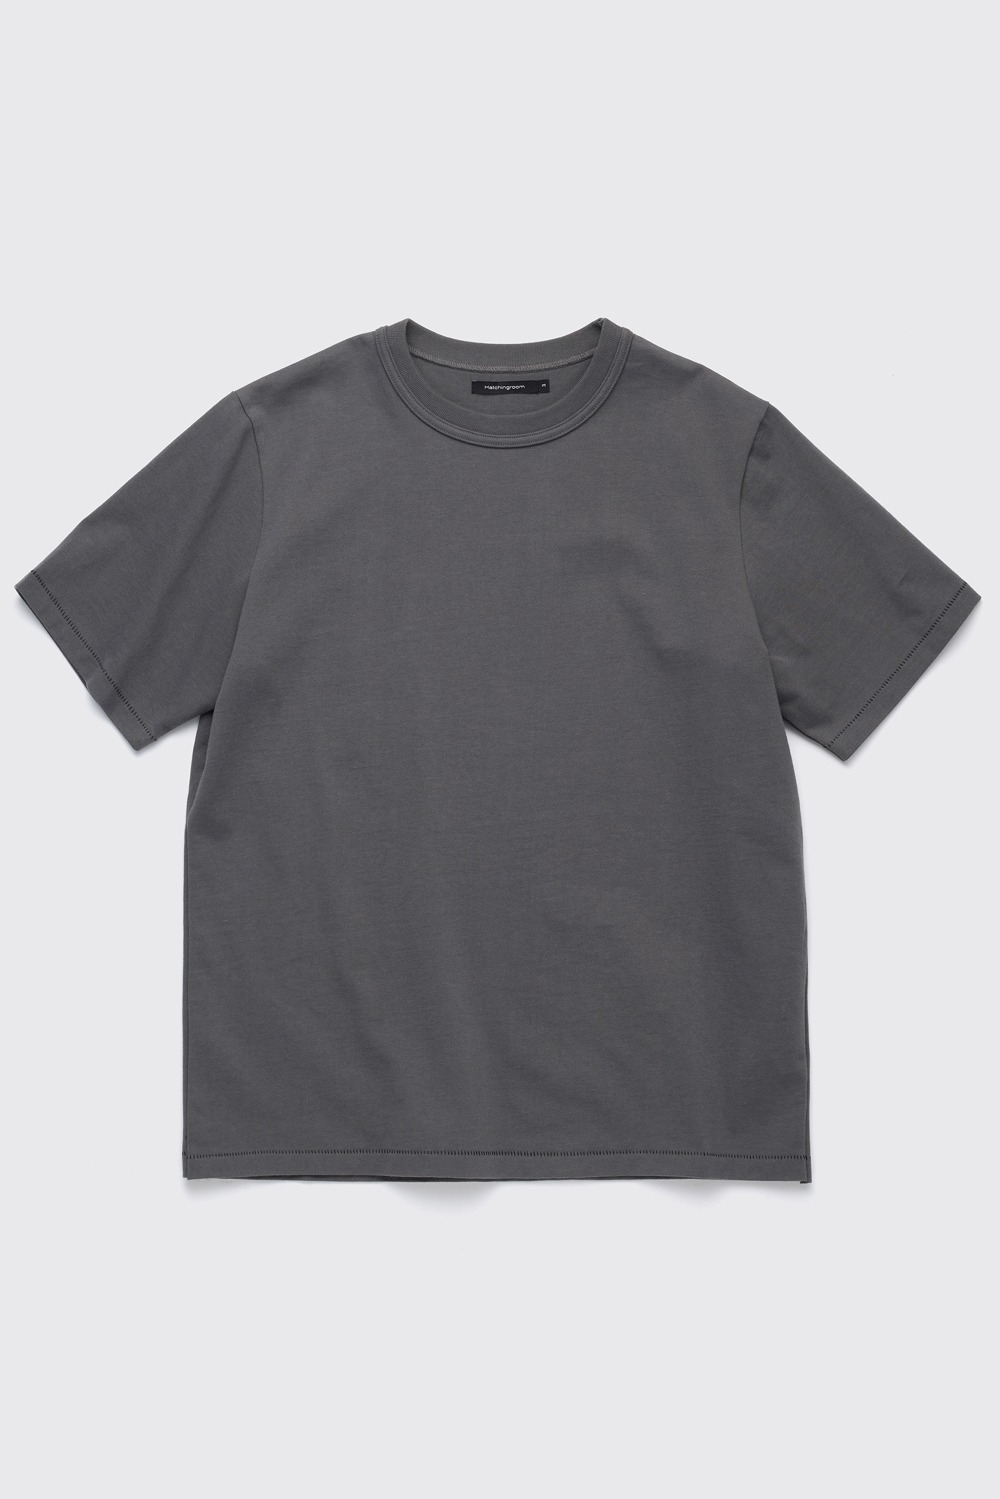 Solid Tee Charcoal (4th Restock)